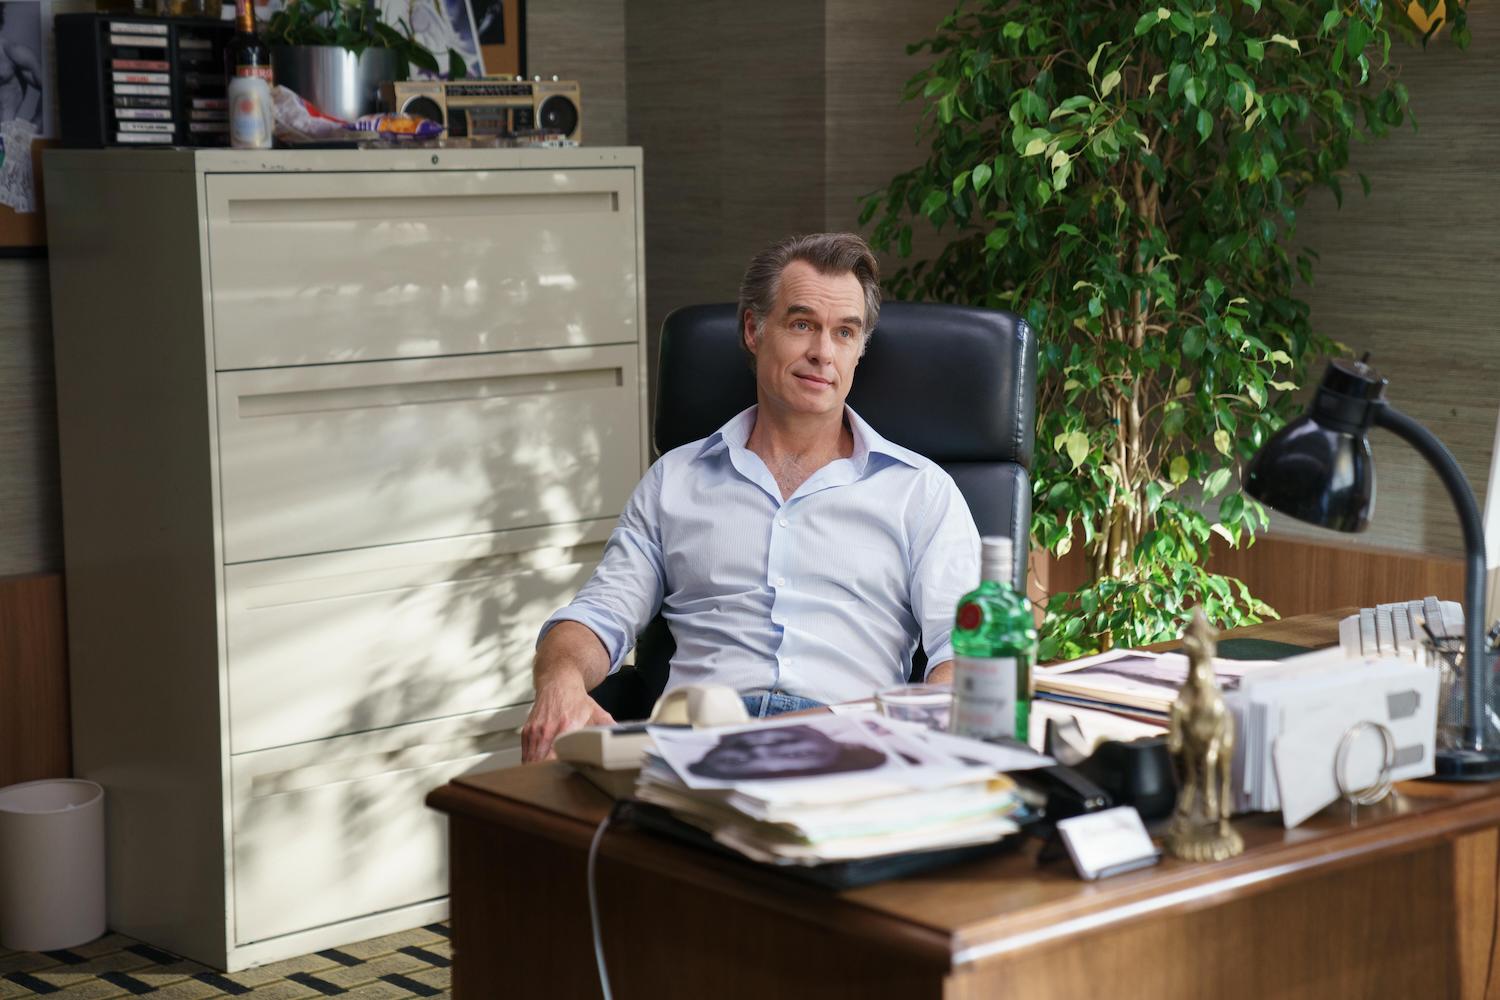 Murray Bartlett as Nick de Noia sits behind a desk in 'Welcome to Chippendales' Episode 7.